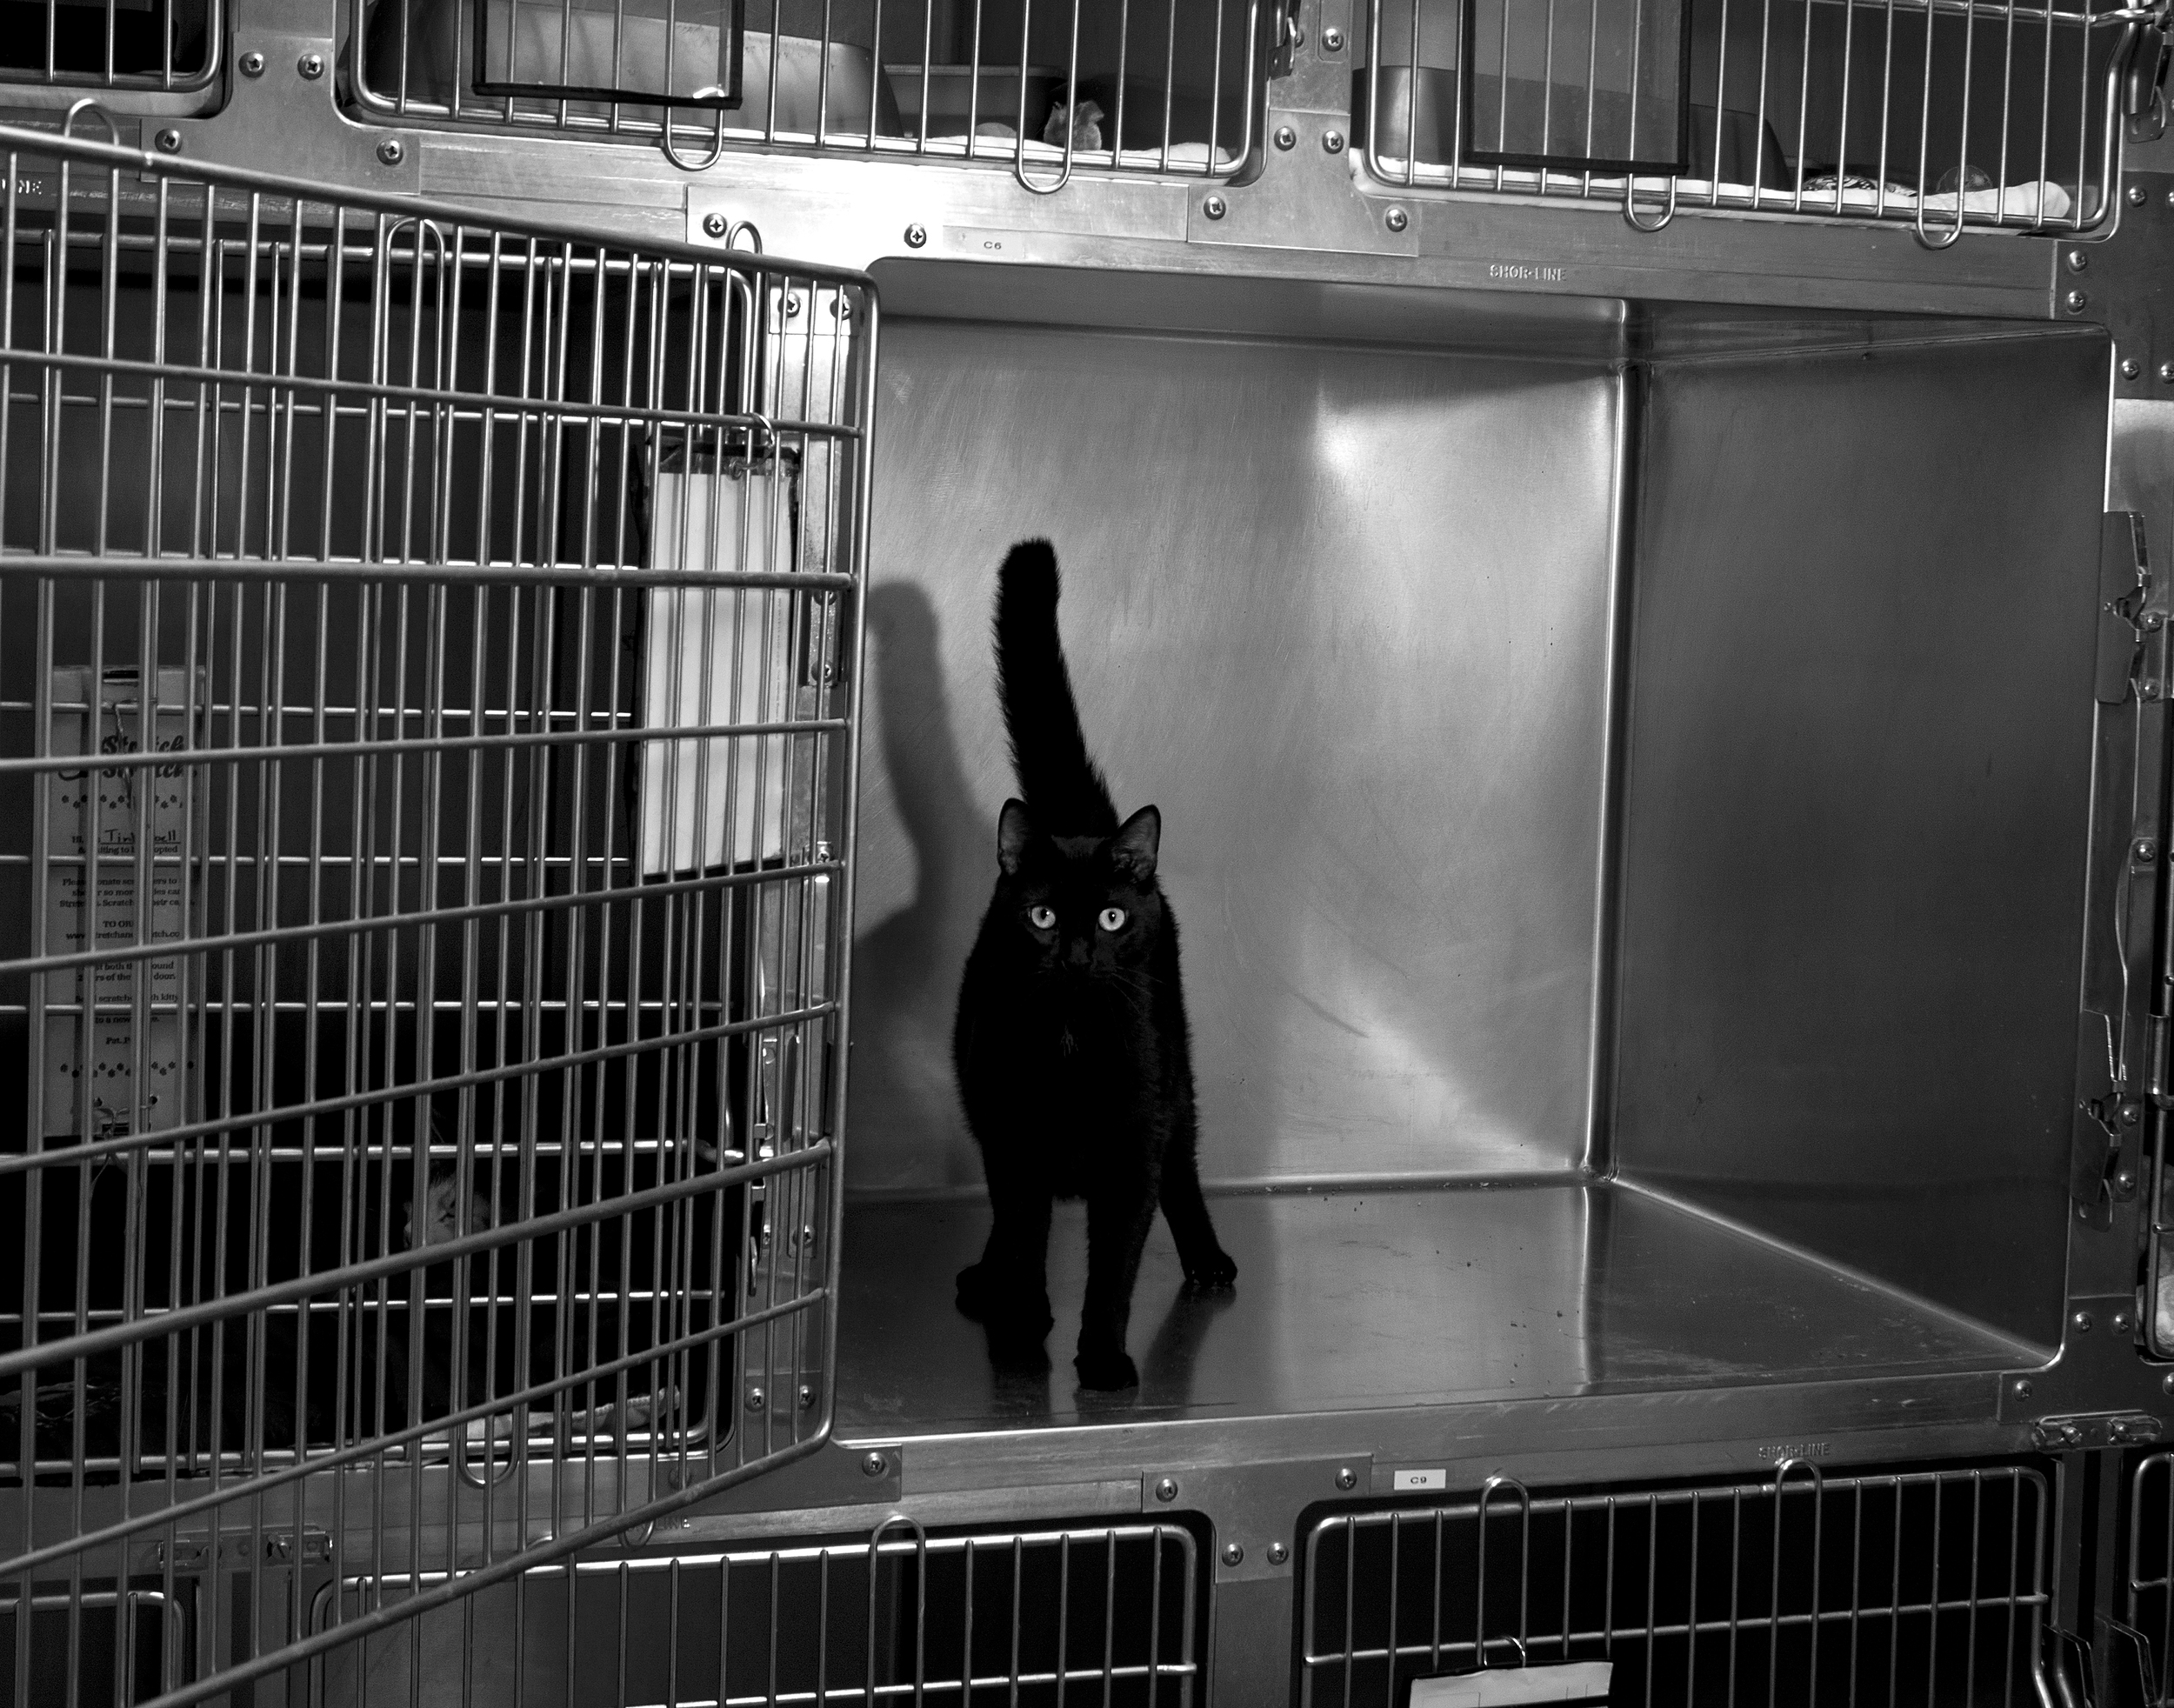   Gone Astray is about a topic near and dear to my heart, animal welfare. Millions of animals are surrendered to shelters every year. These images represent the pets that have become lost, cast aside or forgotten. Pets waiting for their people to com